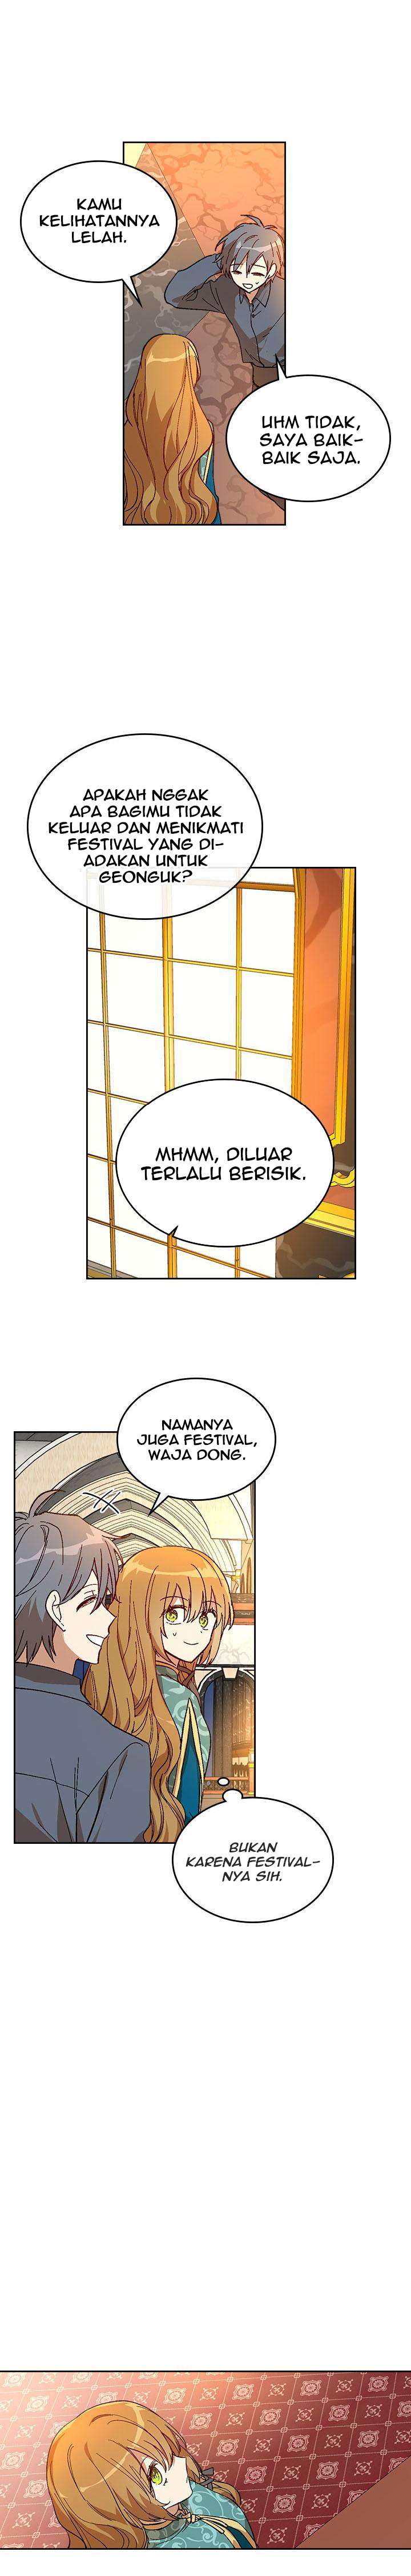 The Reason Why Raeliana Ended Up at the Duke’s Mansion Chapter 101 Bahasa Indonesia